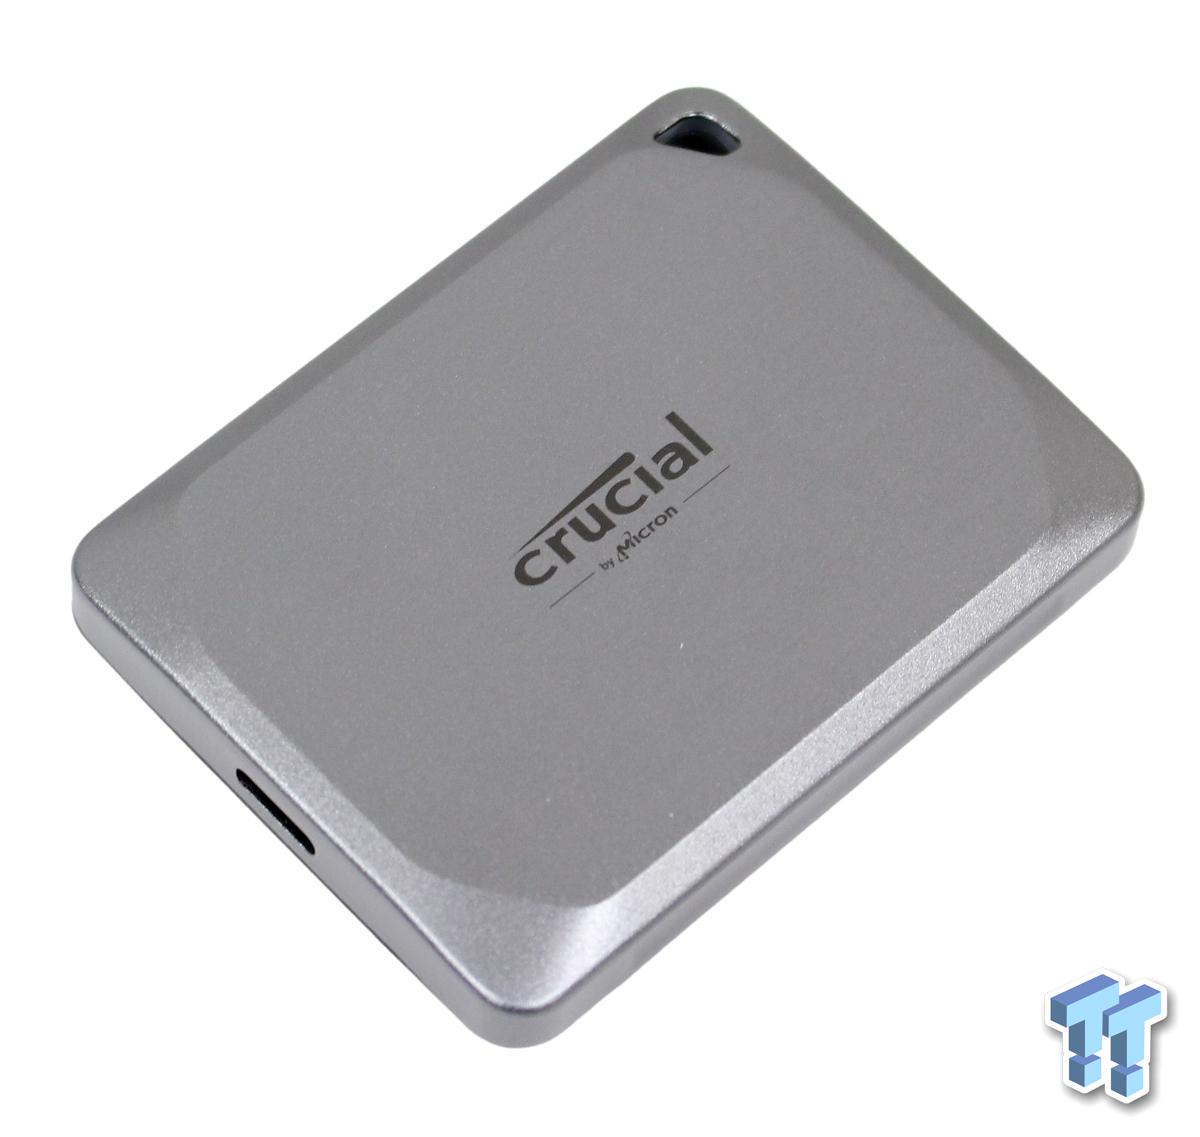 Crucial X9 Pro 2TB Portable SSD, CT2000X9PROSSD9